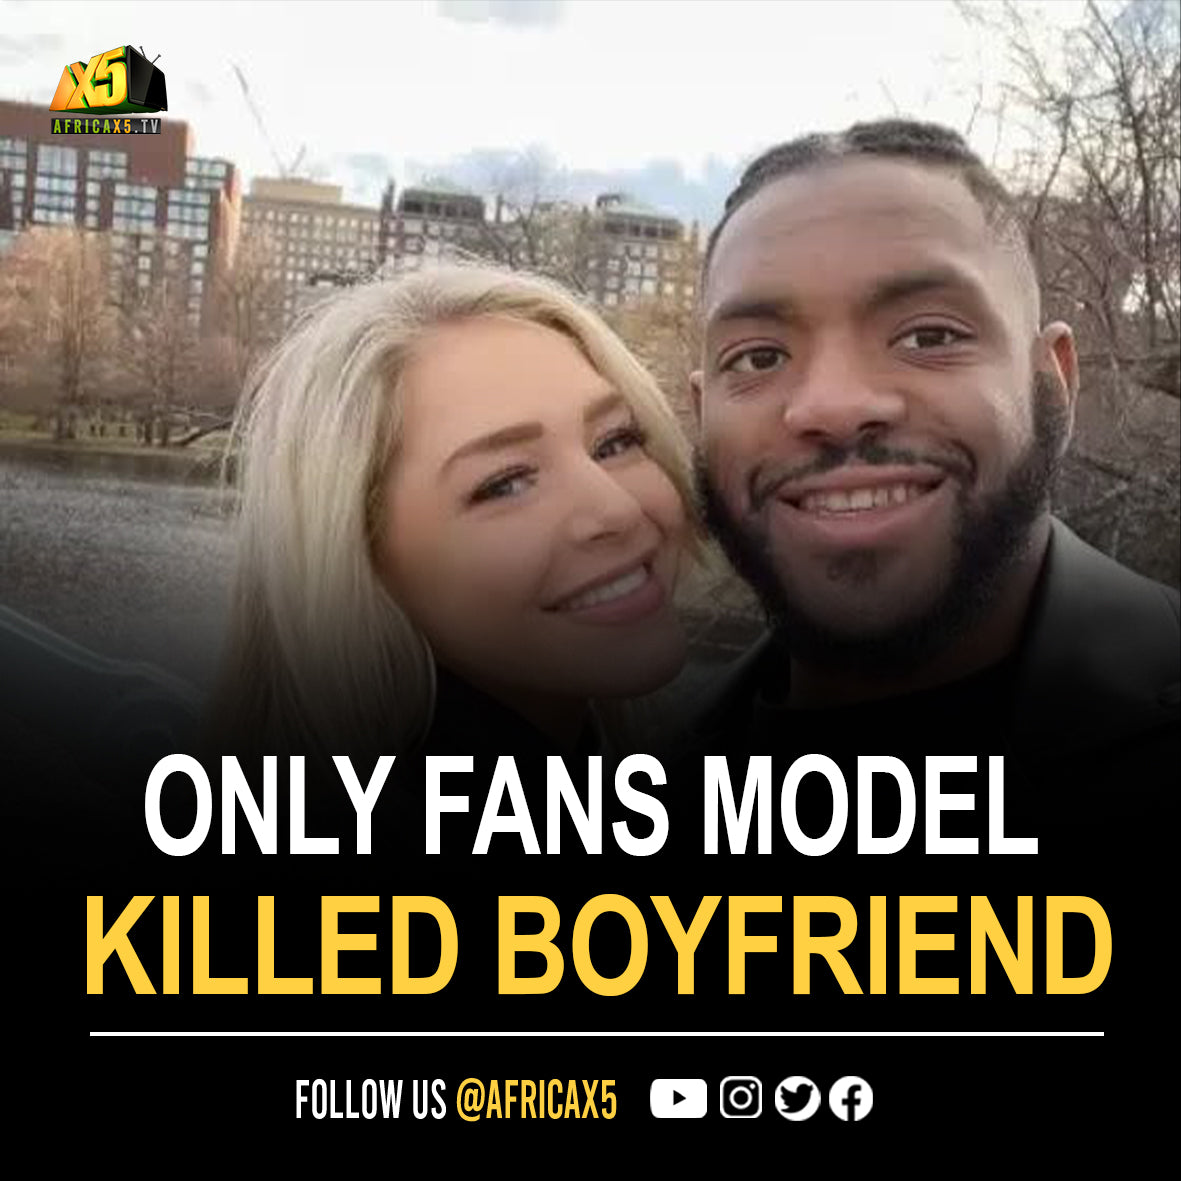 OnlyFans Model Arrested For Murder Of Boyfriend, Had History Of Beating Him